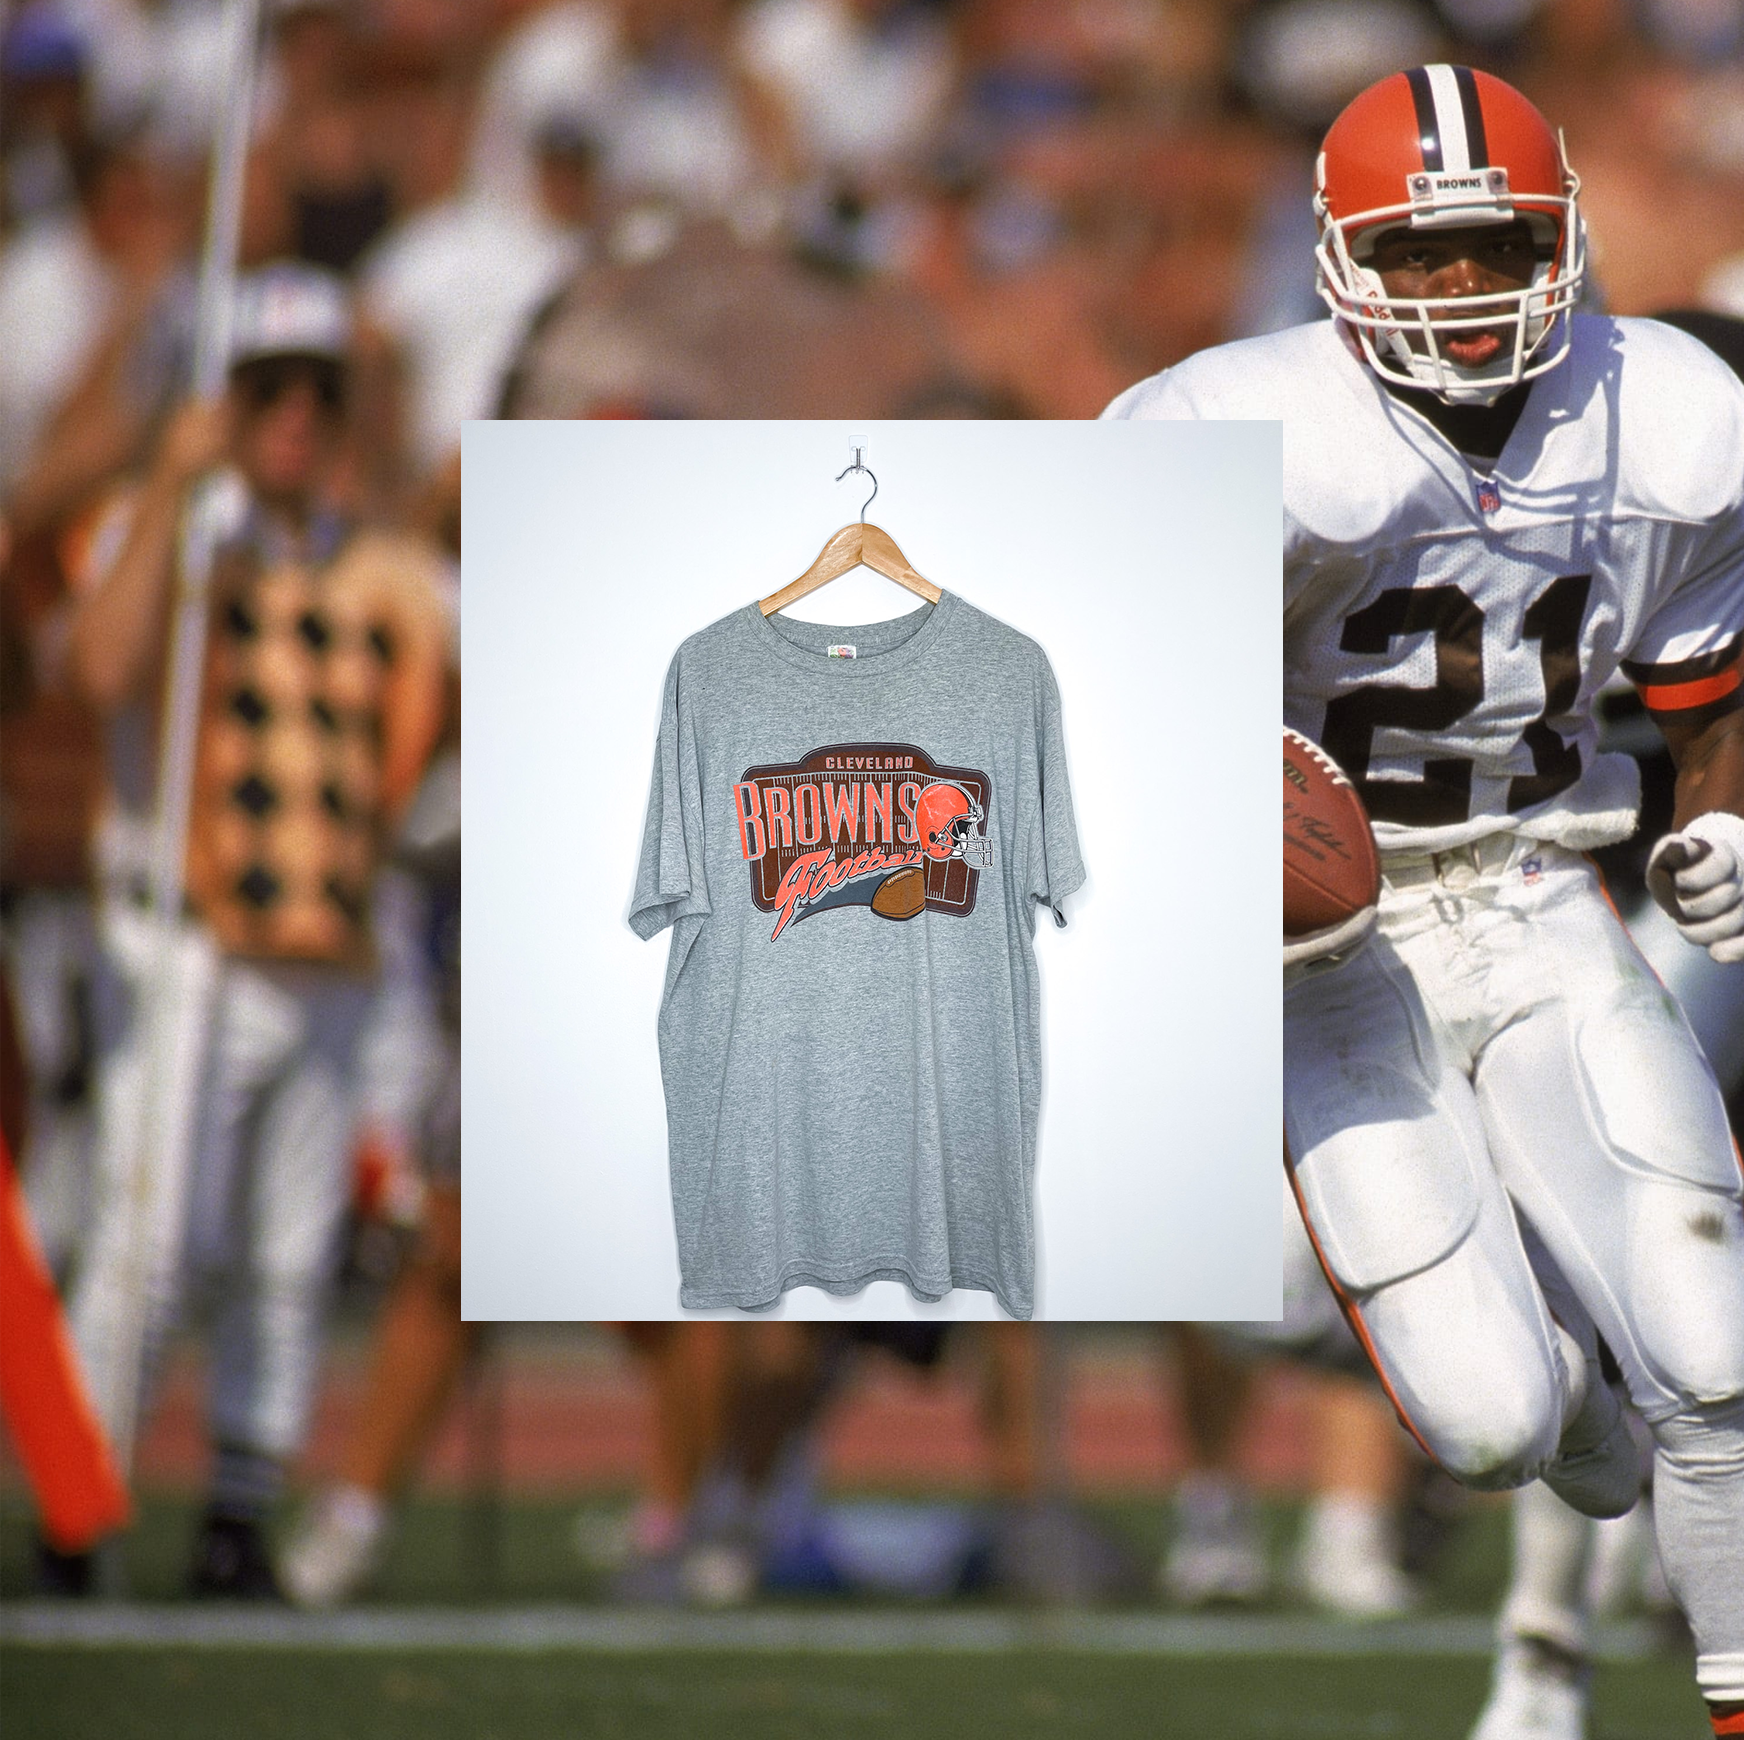 CLEVELAND BROWNS "Cleveland Browns Football" TEE